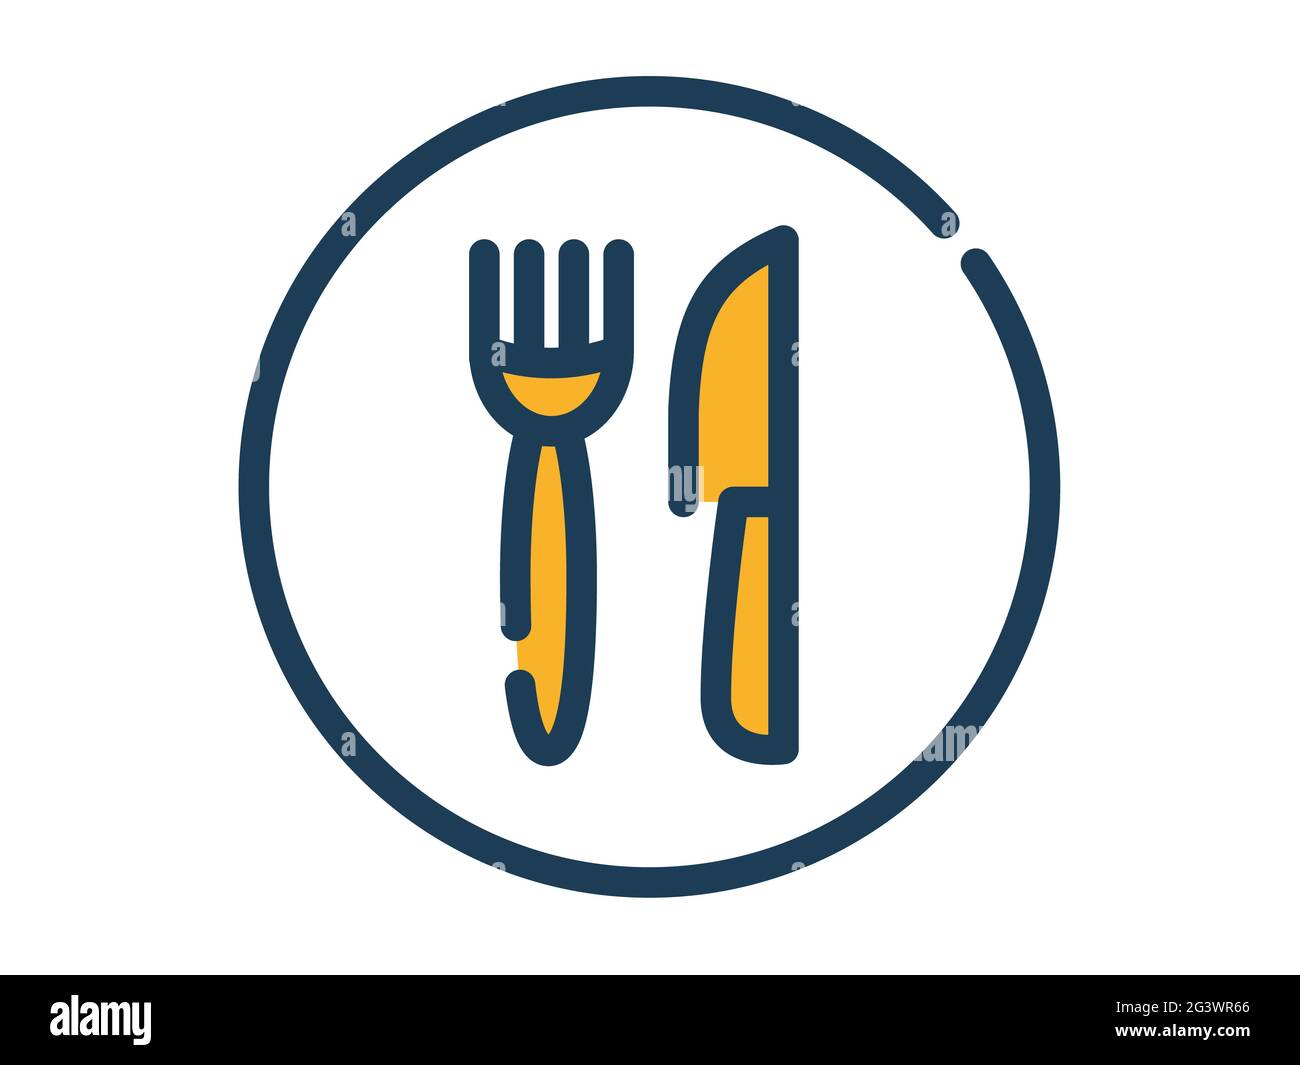 restaurant fork knife plate single isolated icon with dash or dashed line style vector illustration Stock Photo